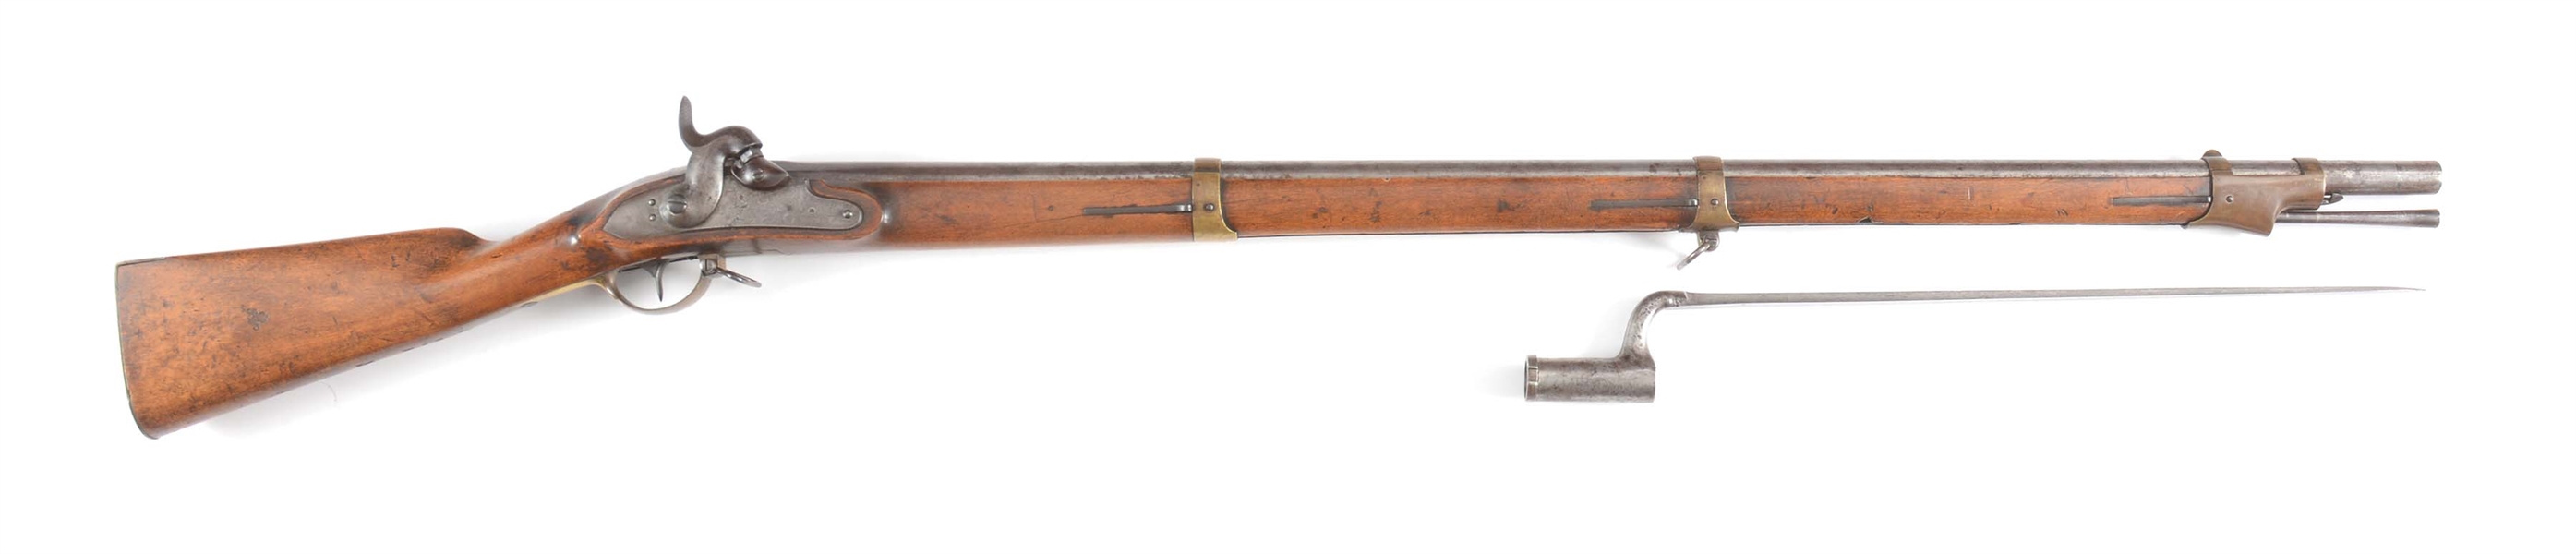 (A) NEISSE 1843 .74 CALIBER PERCUSSION RIFLE WITH BAYONET